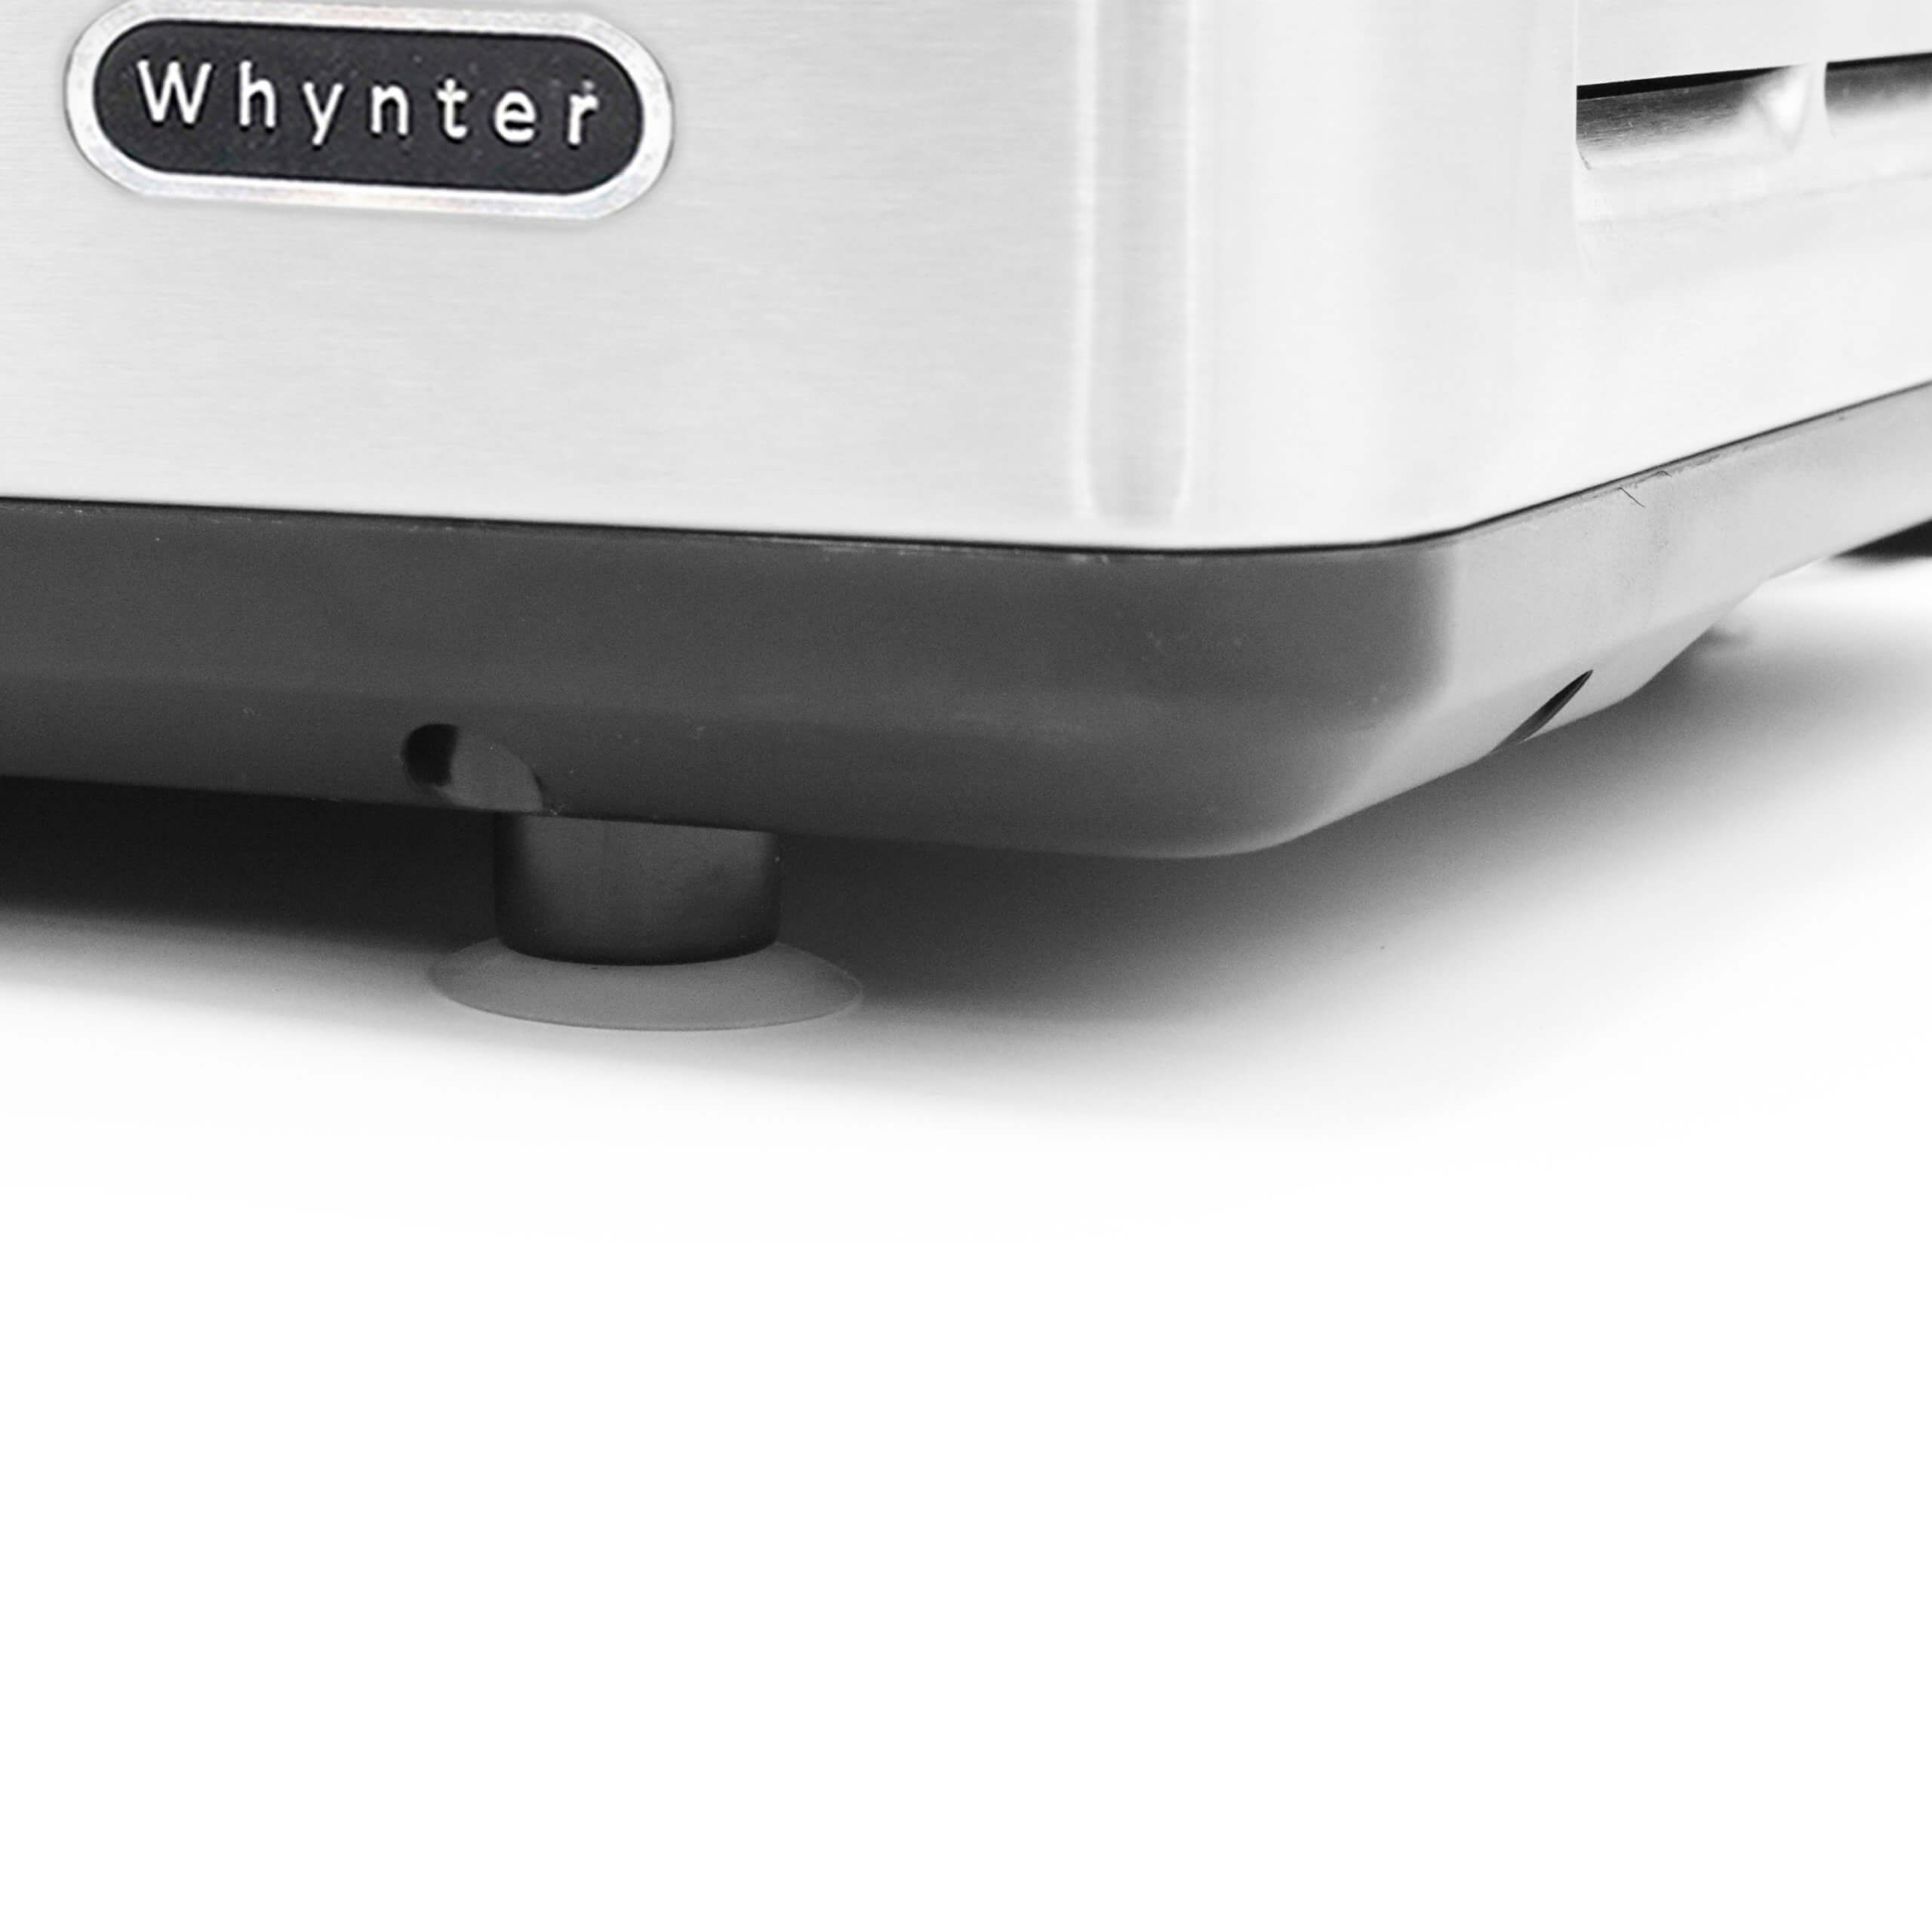 ICR-300SS  Whynter ICR-300SS Portable Instant Automatic